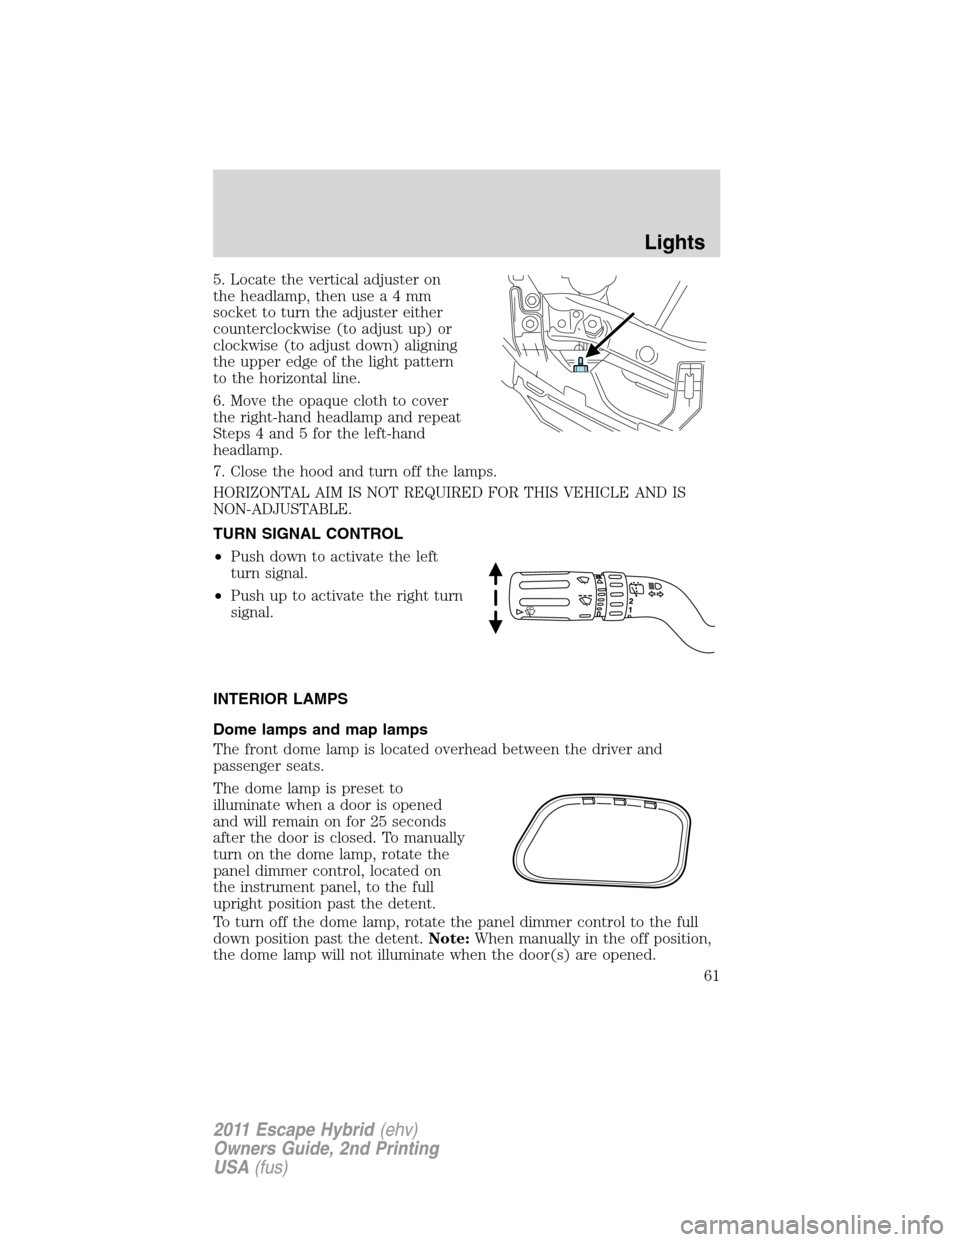 FORD ESCAPE HYBRID 2011 2.G Owners Manual 5. Locate the vertical adjuster on
the headlamp, then use a 4 mm
socket to turn the adjuster either
counterclockwise (to adjust up) or
clockwise (to adjust down) aligning
the upper edge of the light p